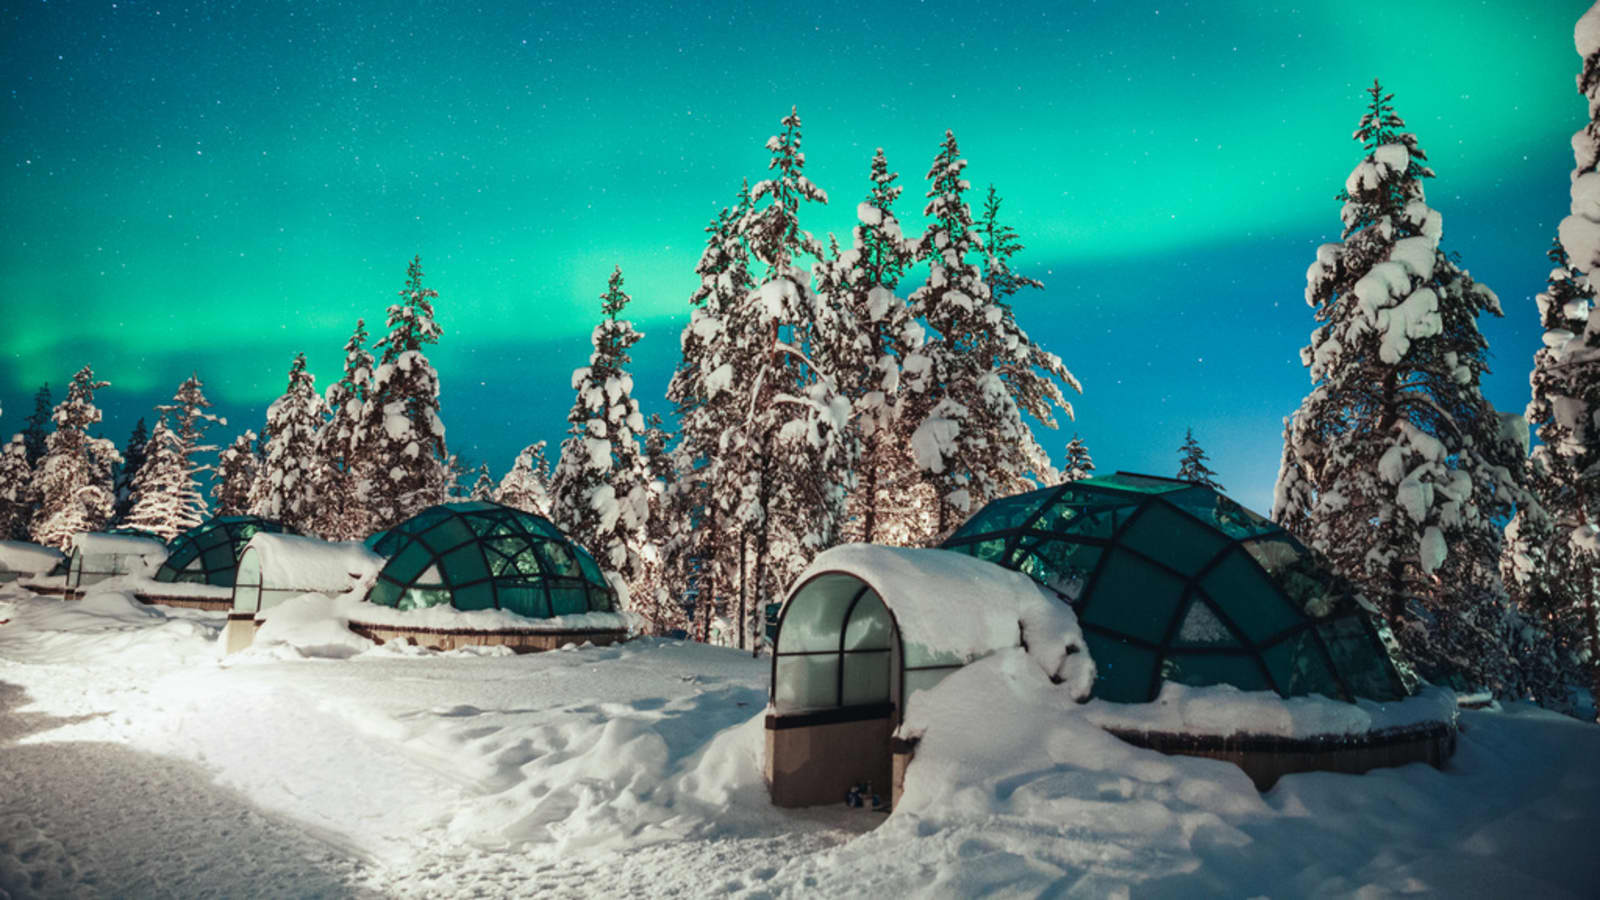 Glat Forudsige Ud over See the Northern Lights from a glass igloo at Kakslauttanen in Finland